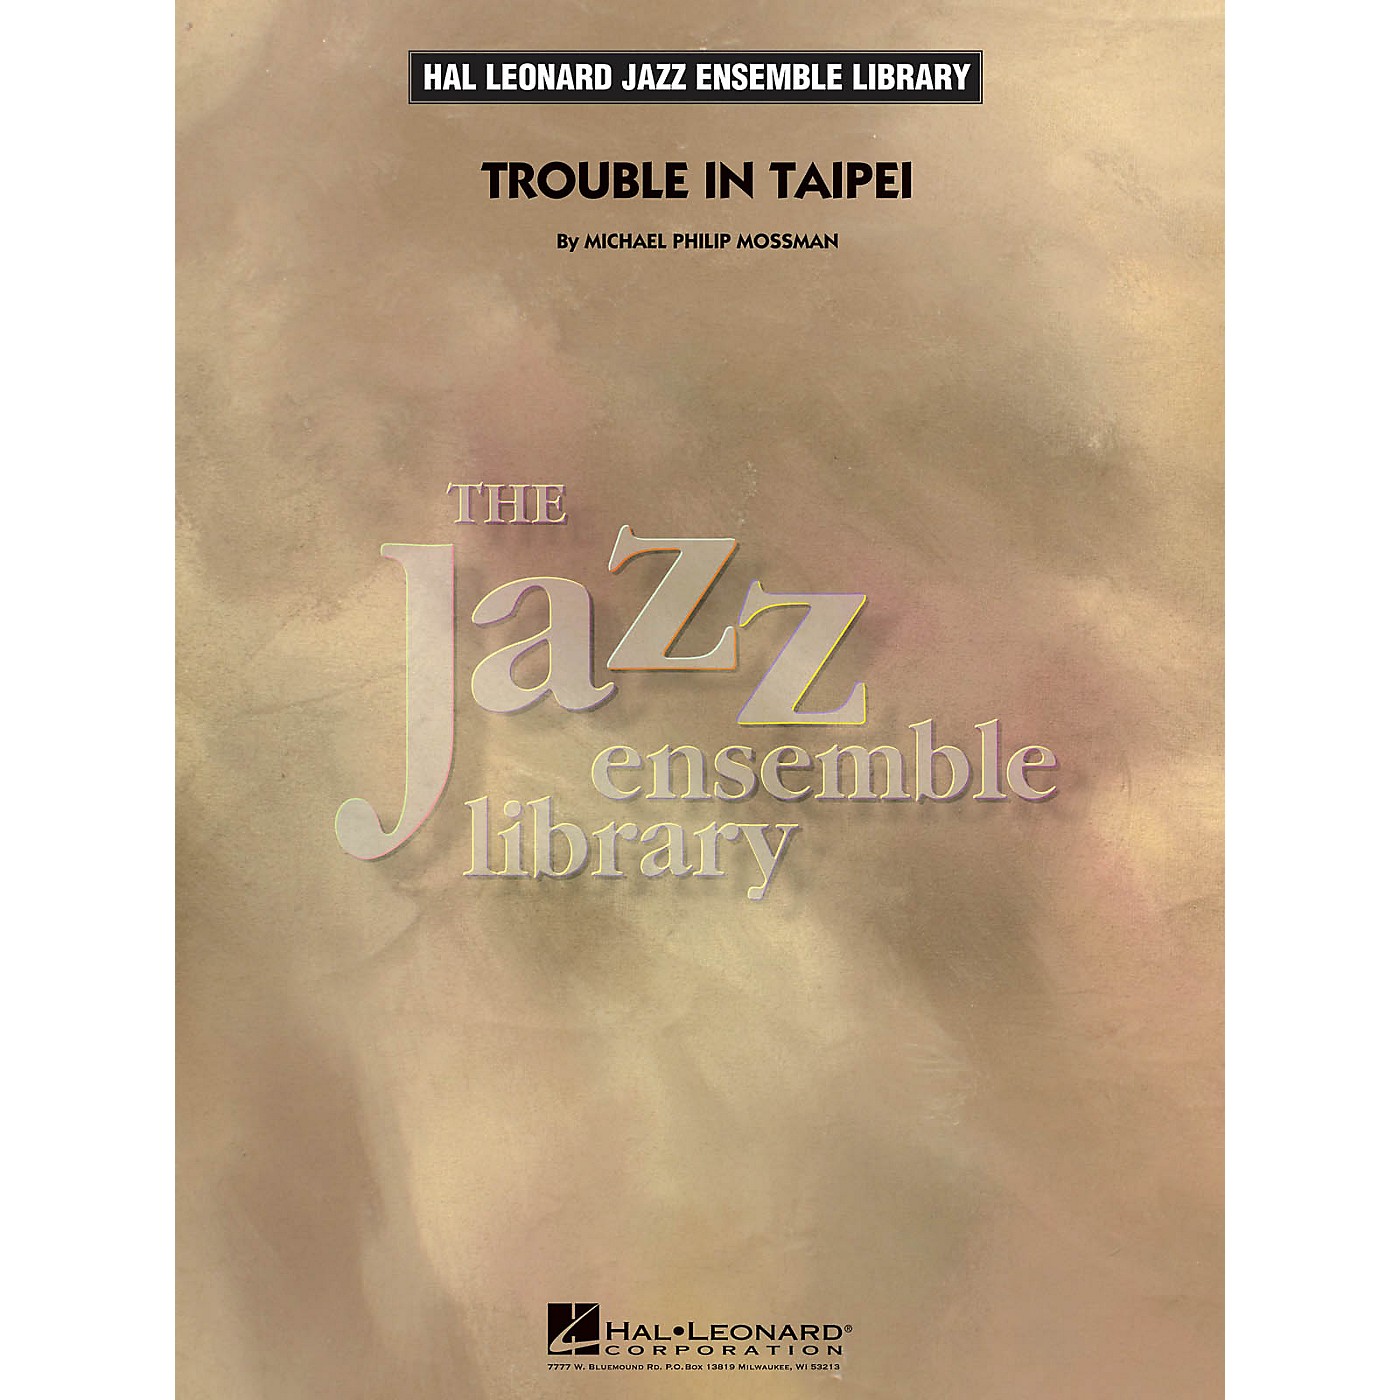 Hal Leonard Trouble in Taipei Jazz Band Level 4 Composed by Michael Philip Mossman thumbnail